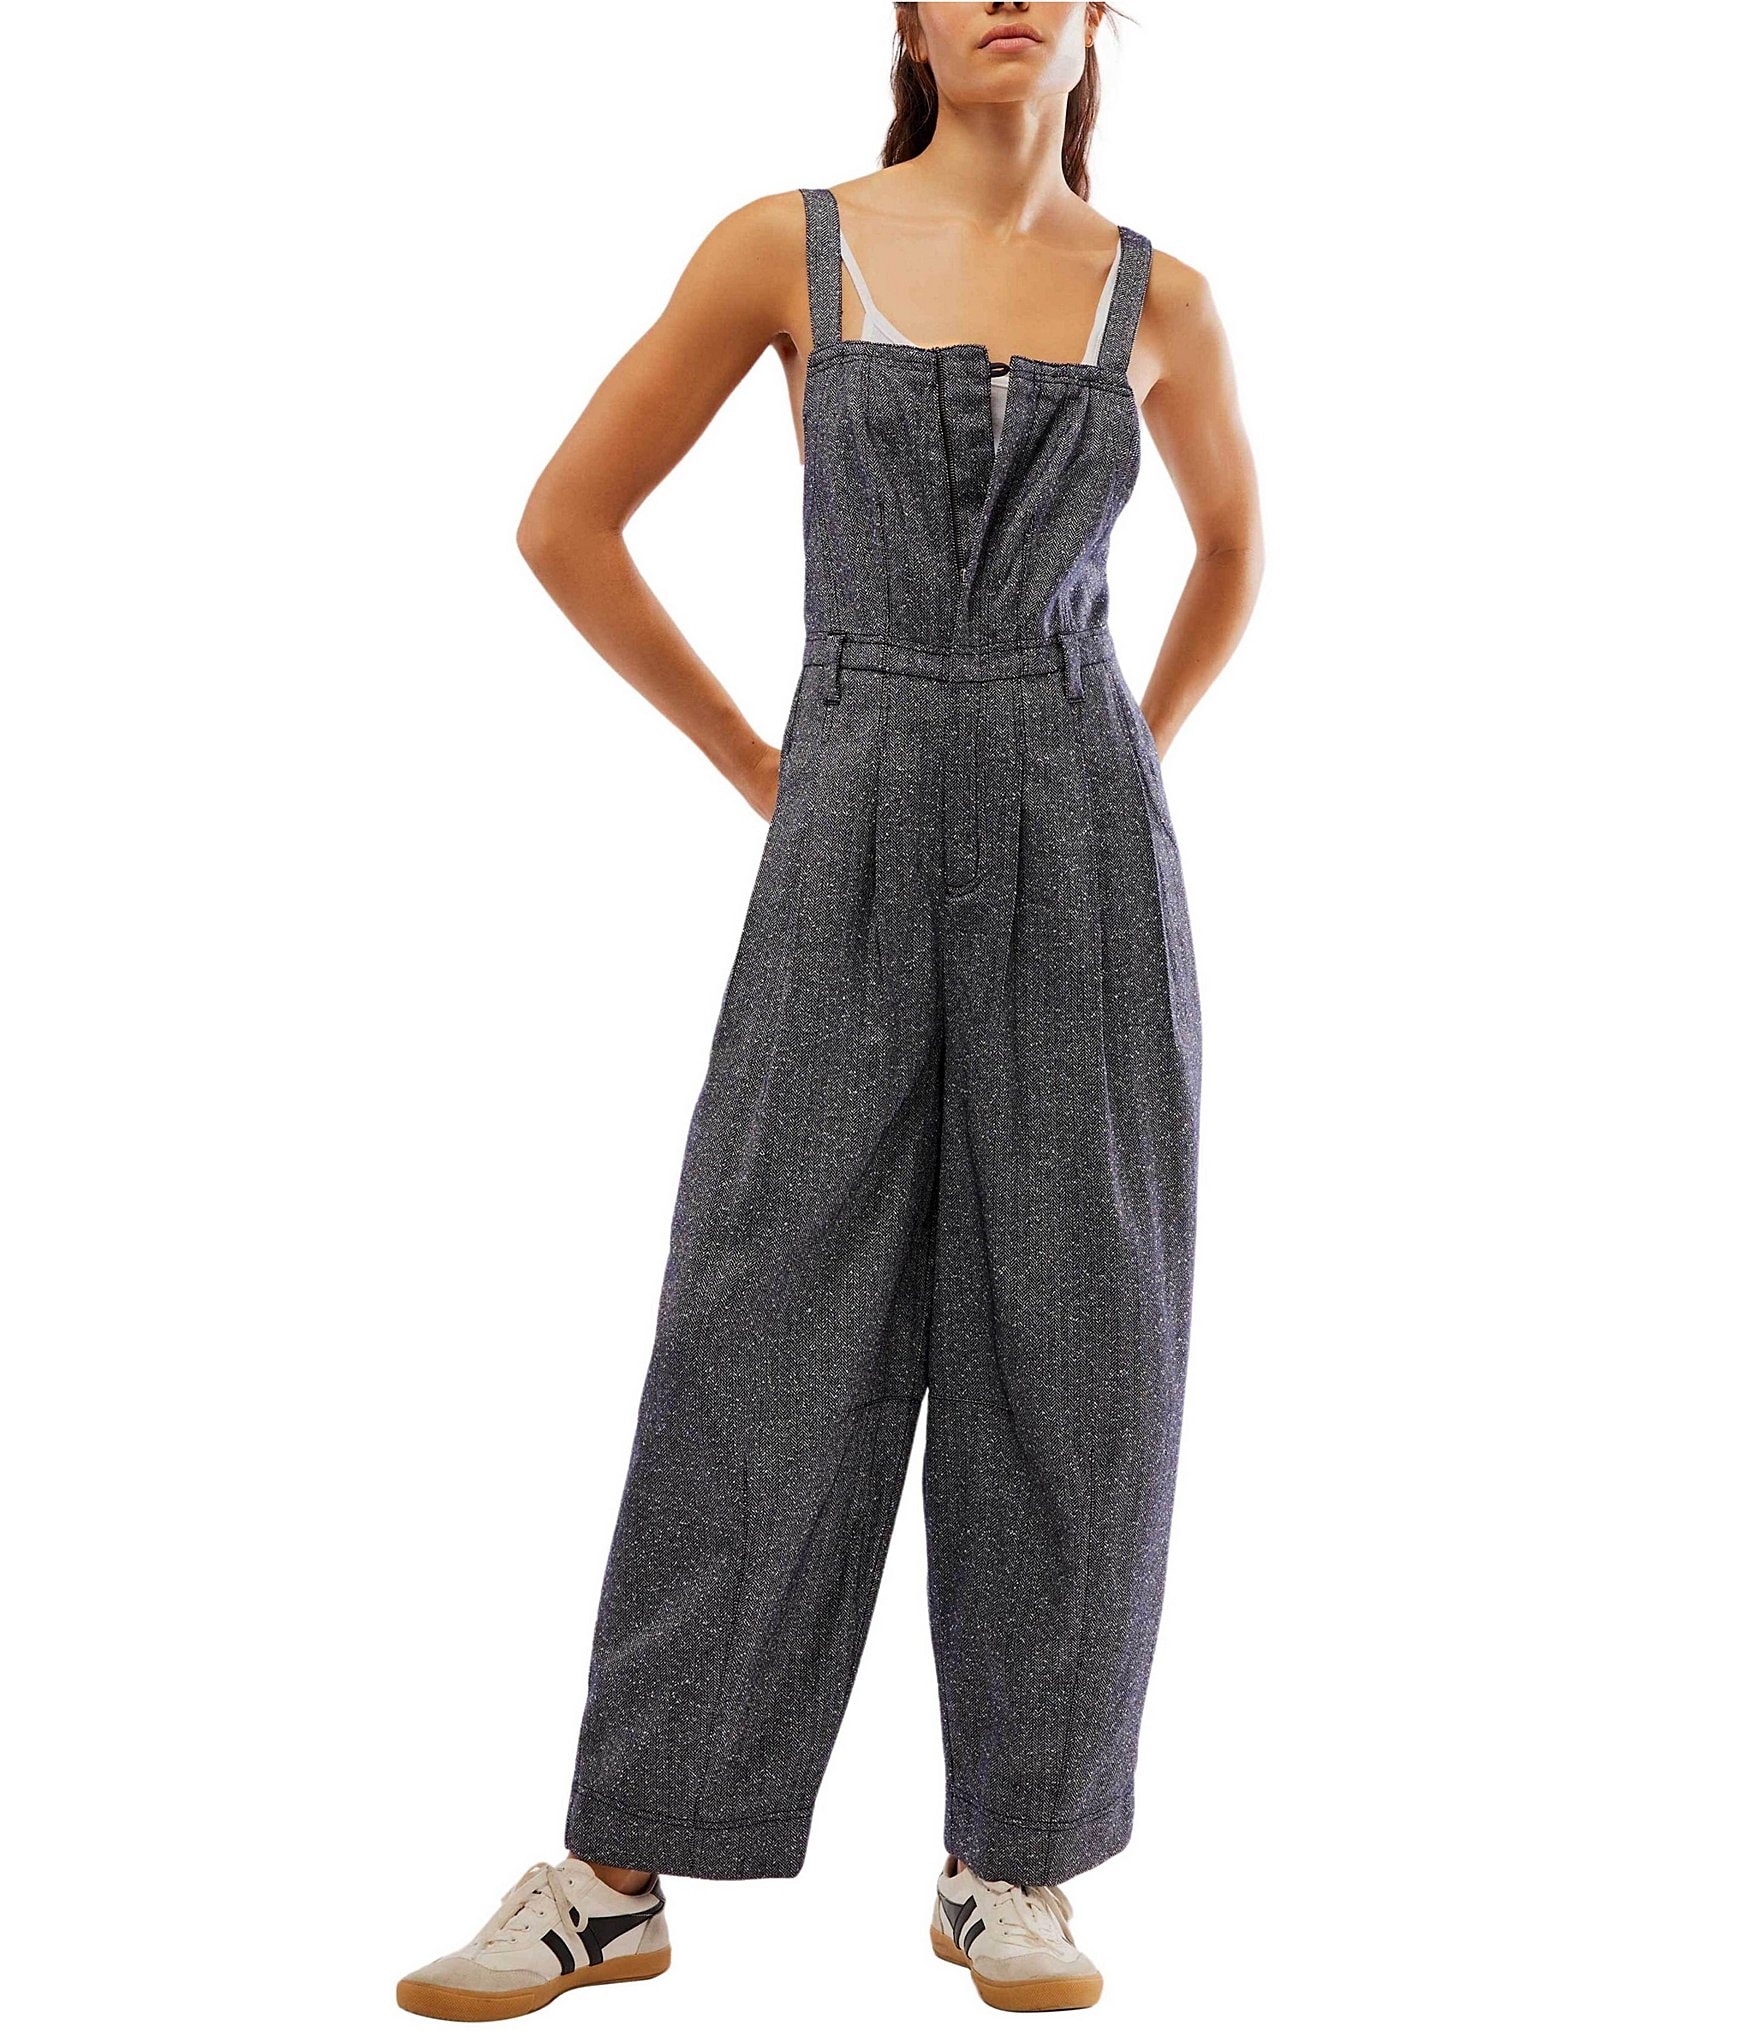 Lionshy Square Neck Double Lined Jumpsuit Sleeveless Bodysuit For